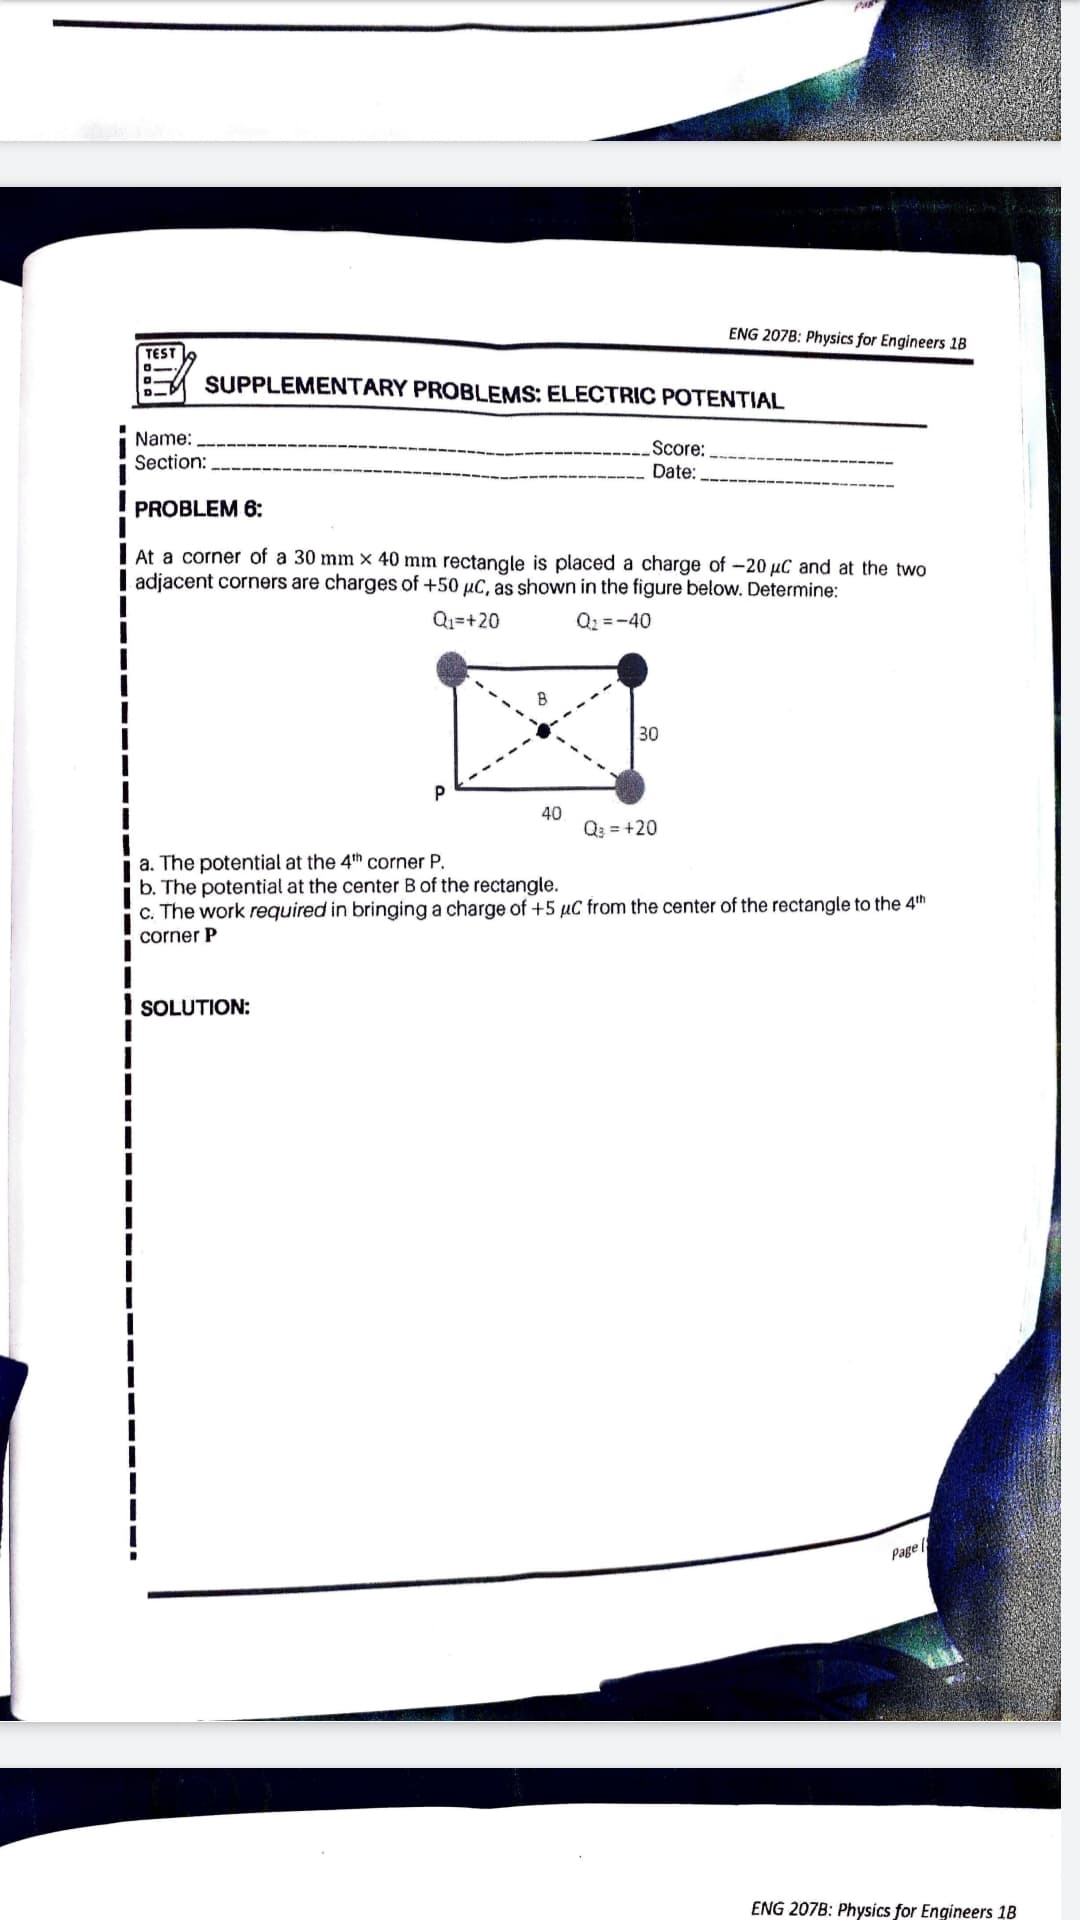 ENG 207B: Physics for Engineers 1B
TEST
o.
SUPPLEMENTARY PROBLEMS: ELECTRIC POTENTIAL
Name:
Score:
Date:
Section:
PROBLEM 6:
I At a corner of a 30 mm × 40 mm rectangle is placed a charge of -20 µC and at the two
| adjacent corners are charges of +50 µC, as shown in the figure below. Determine:
Q1=+20
Q2 =-40
30
40
Q3 = +20
a. The potential at the 4th corner P.
b. The potential at the center B of the rectangle.
c. The work required in bringing a charge of +5 µC from the center of the rectangle to the 4th
corner P
SOLUTION:
Page
ENG 207B: Physics for Engineers 1B
